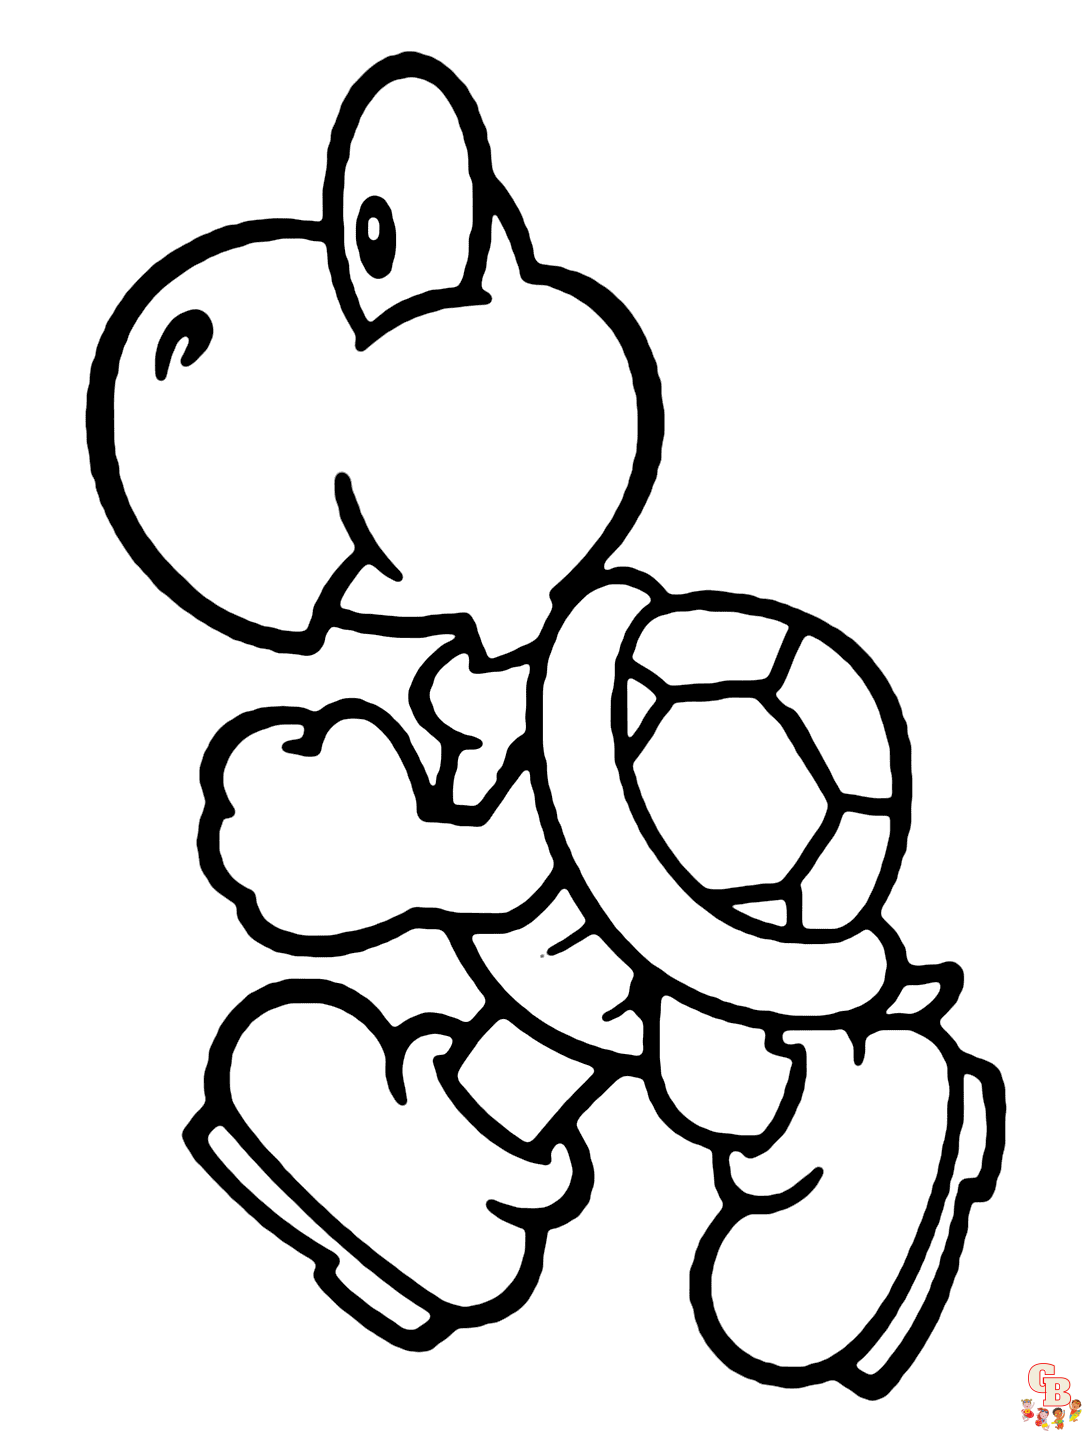 Koopa Troopa coloring pages to print